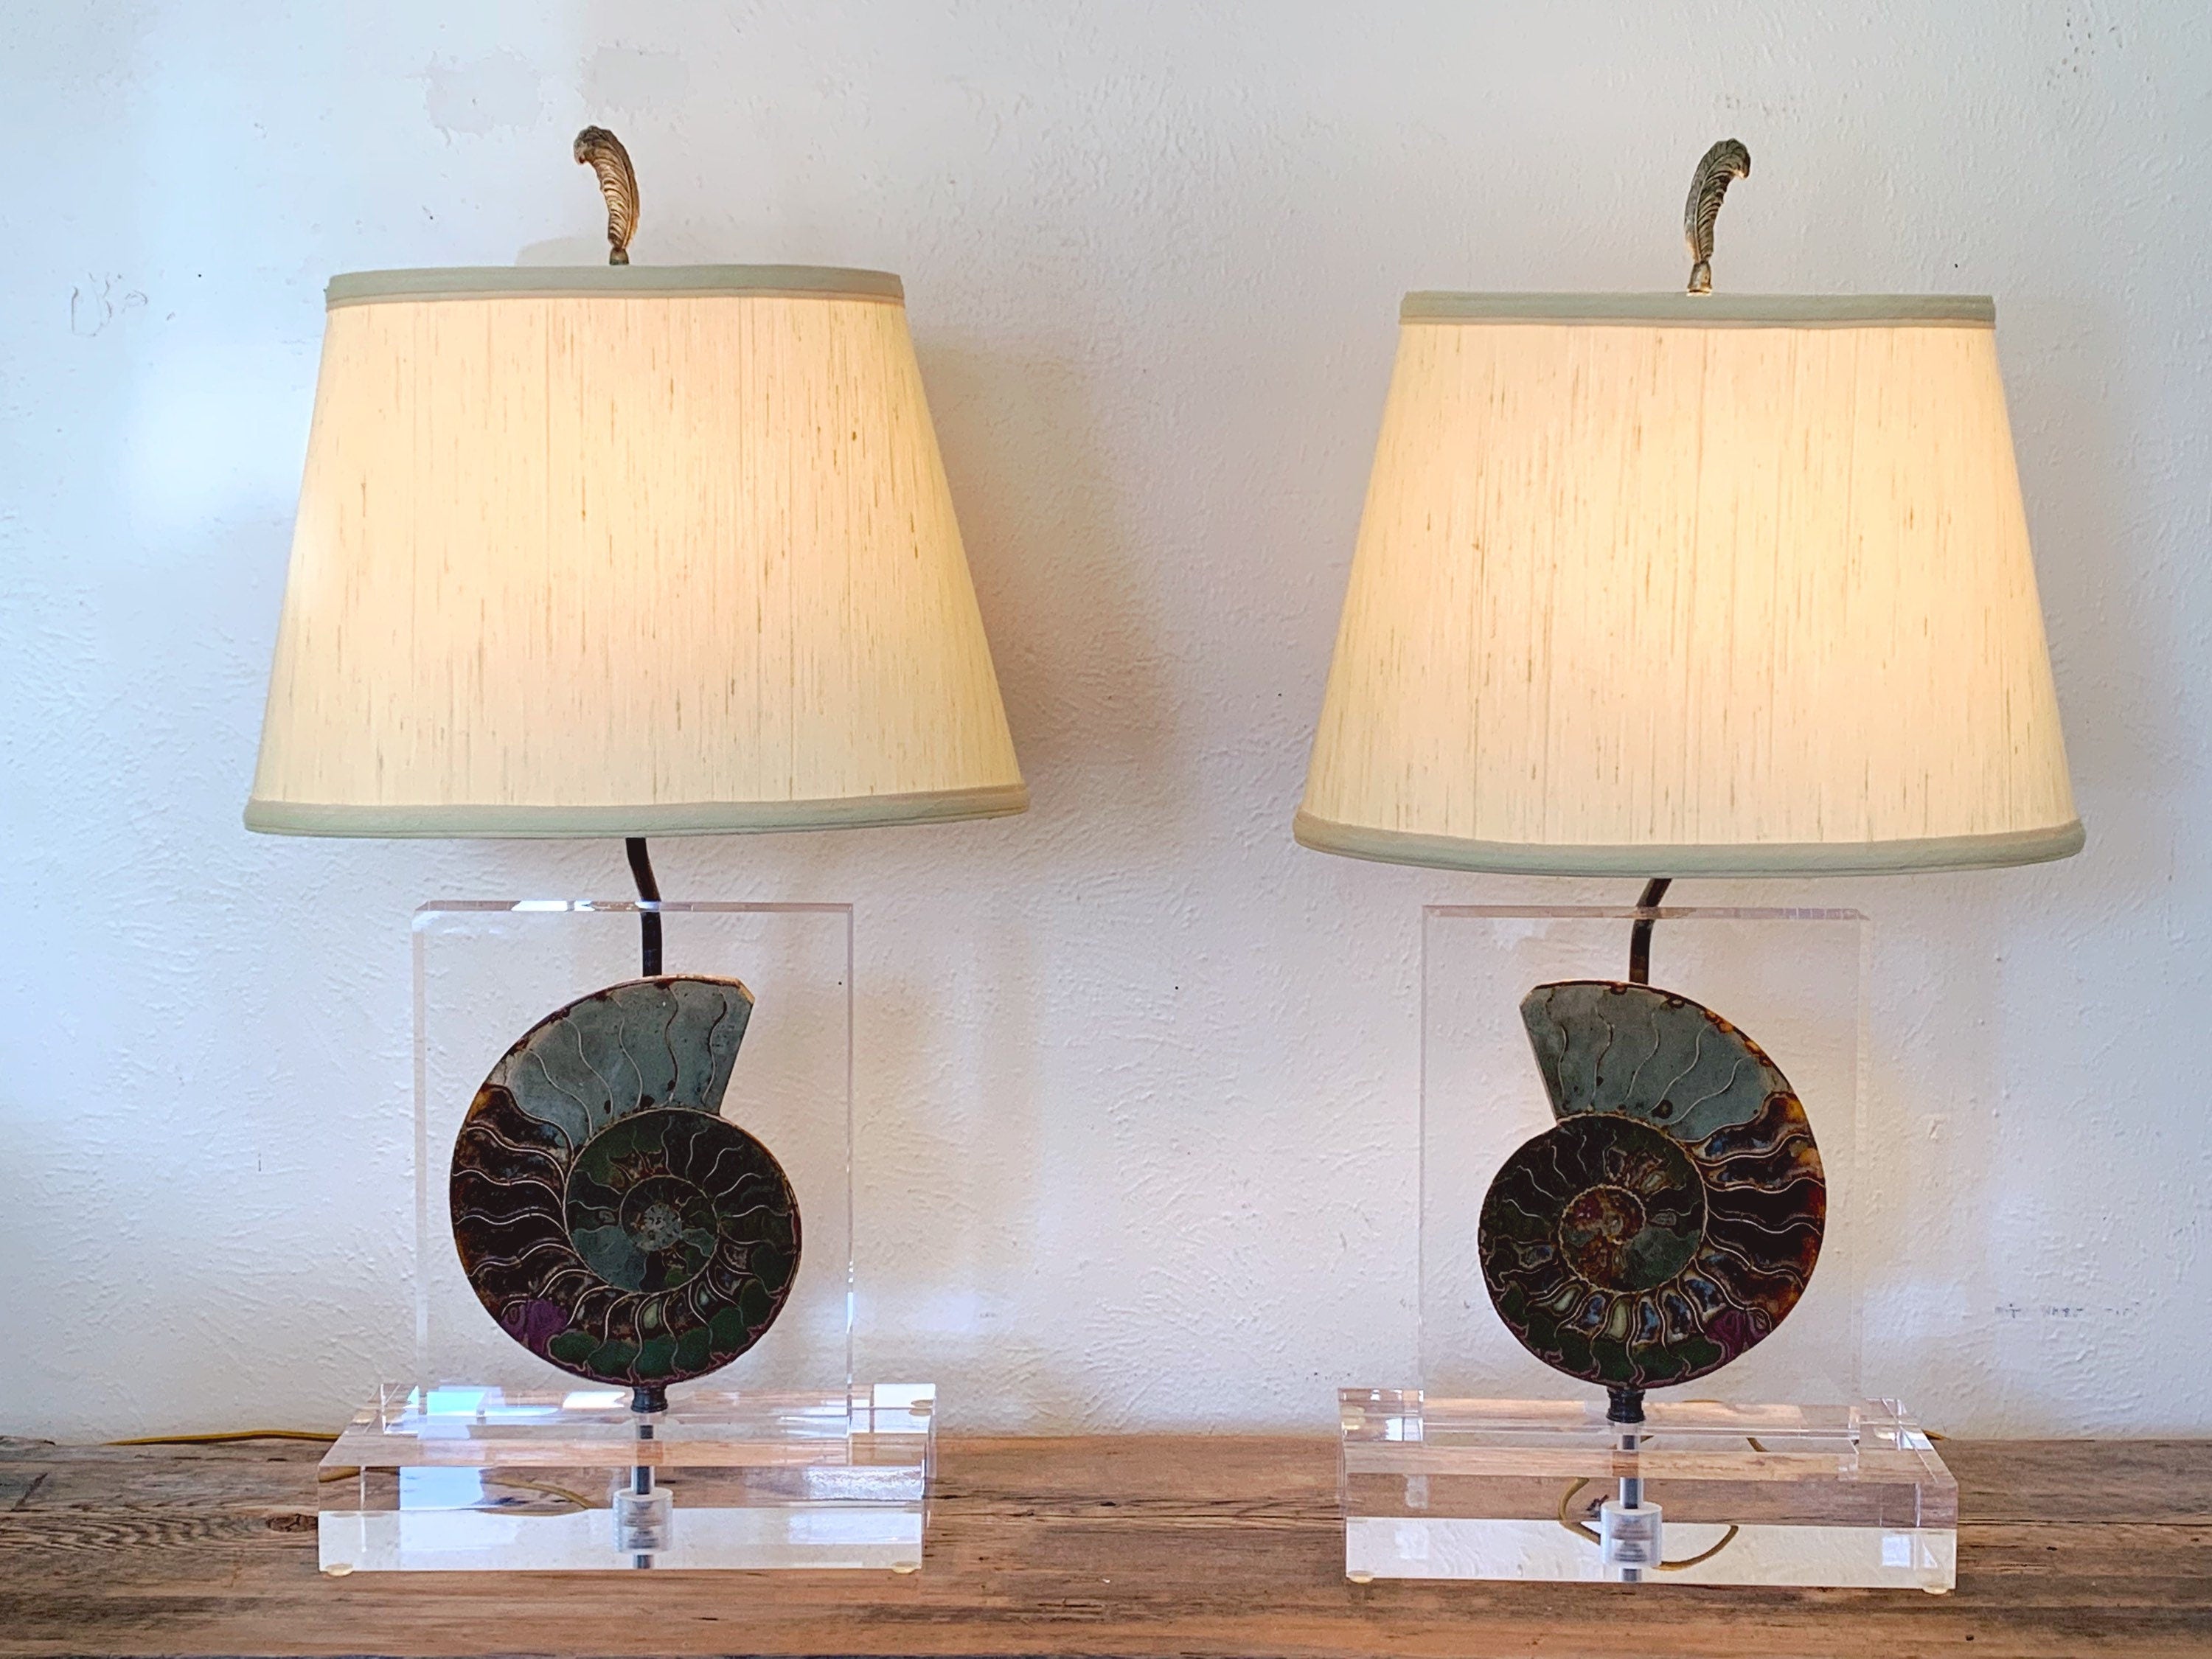 Pair of Vintage Mounted Ammonite Lucite Table Lamps | 1970s Geometric Clear Lucite Lamps with Fossil Specimen | Bedroom Lighting Decor